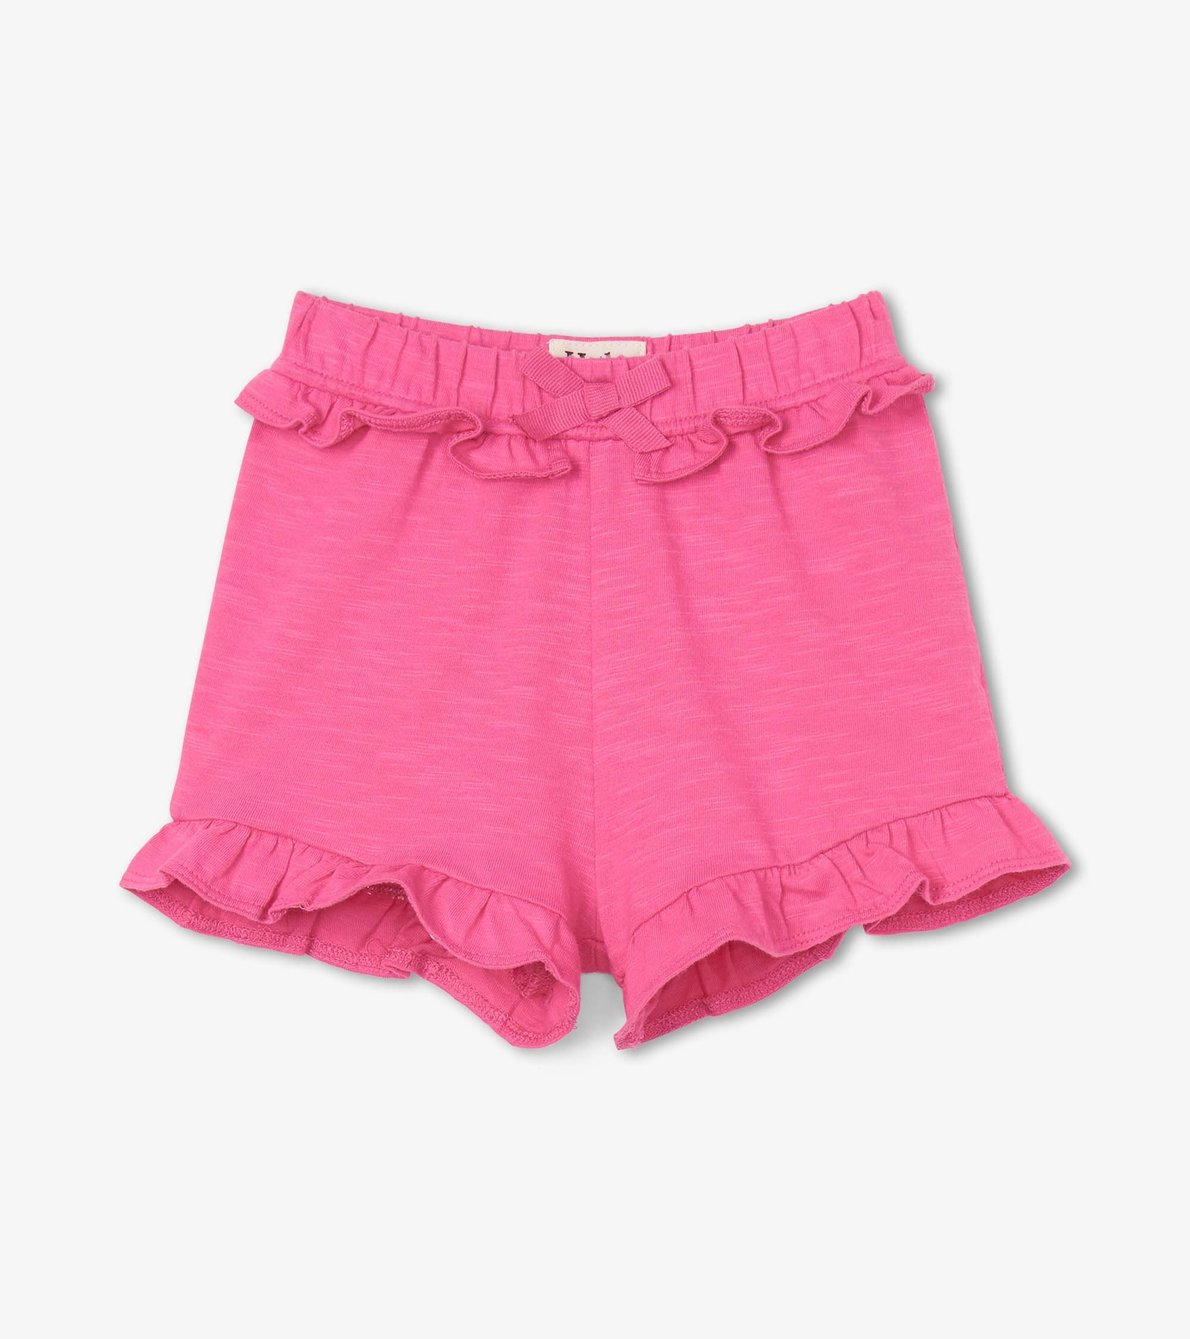 View larger image of Pink Baby Ruffle Shorts